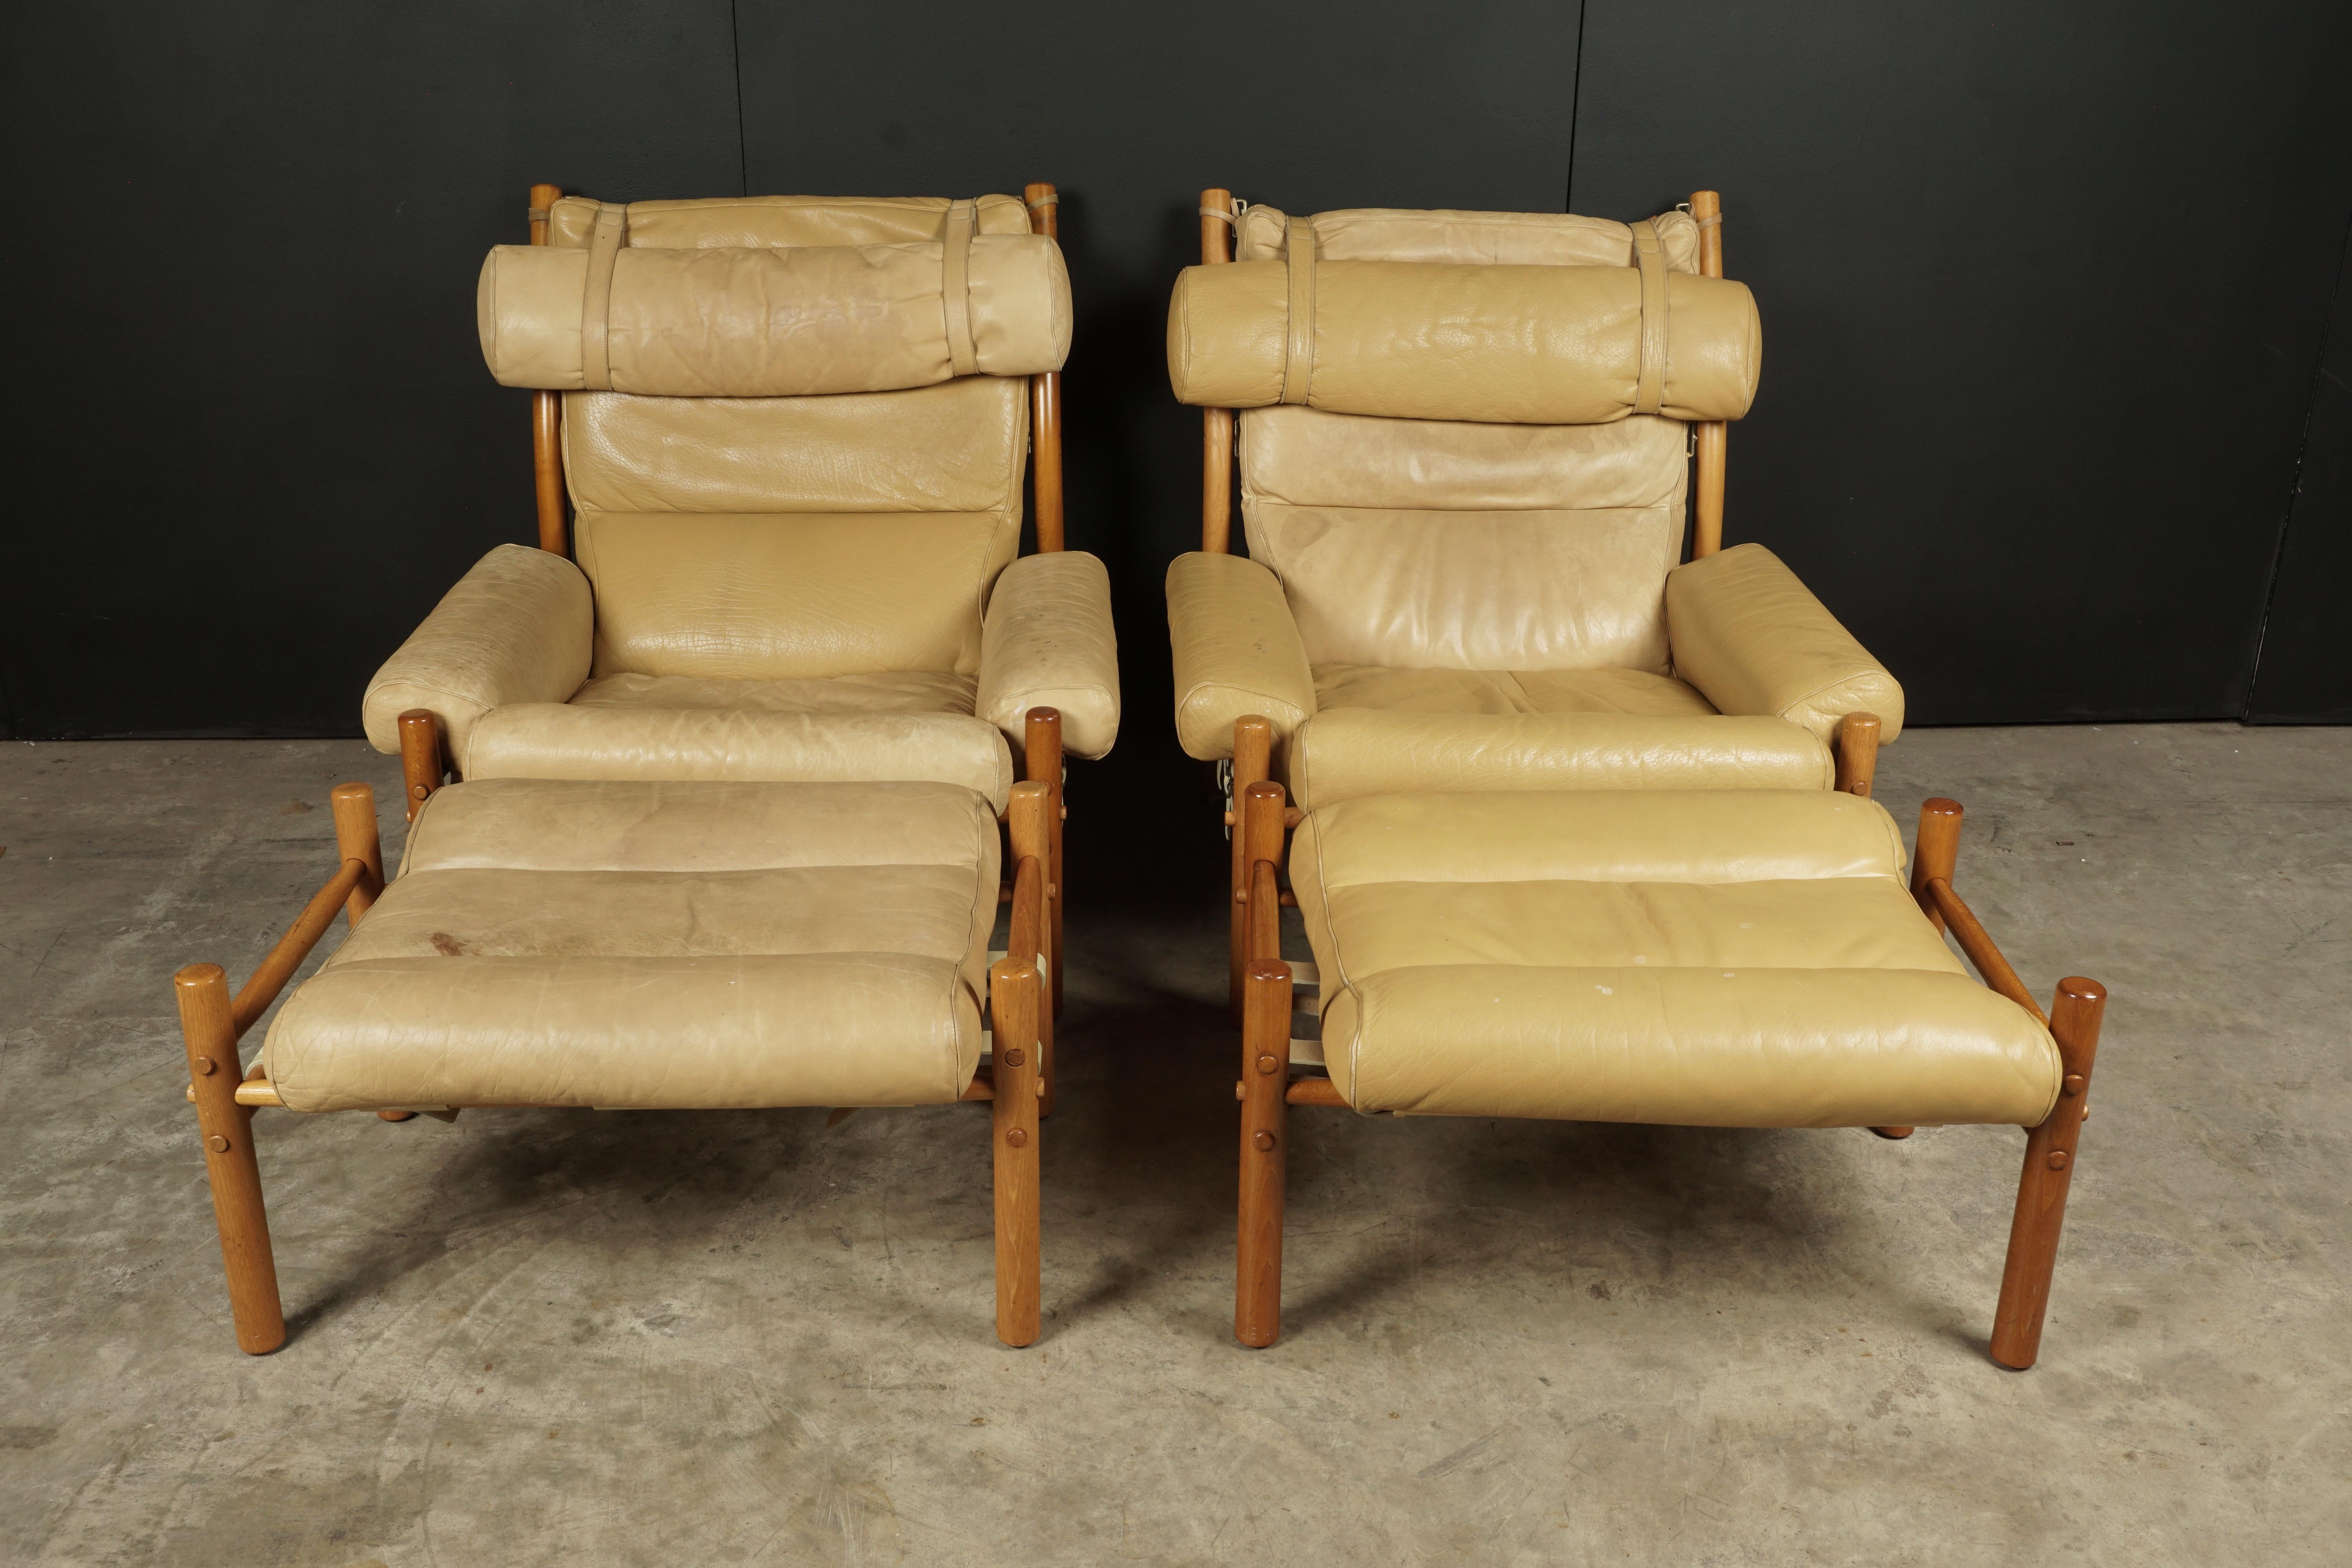 Pair of Arne Norell lounge chairs with foot stools, Model Inca, circa 1960. Original light tan leather on a solid birch frame. Produced by Arne Norell AB, Aneby Sweden.